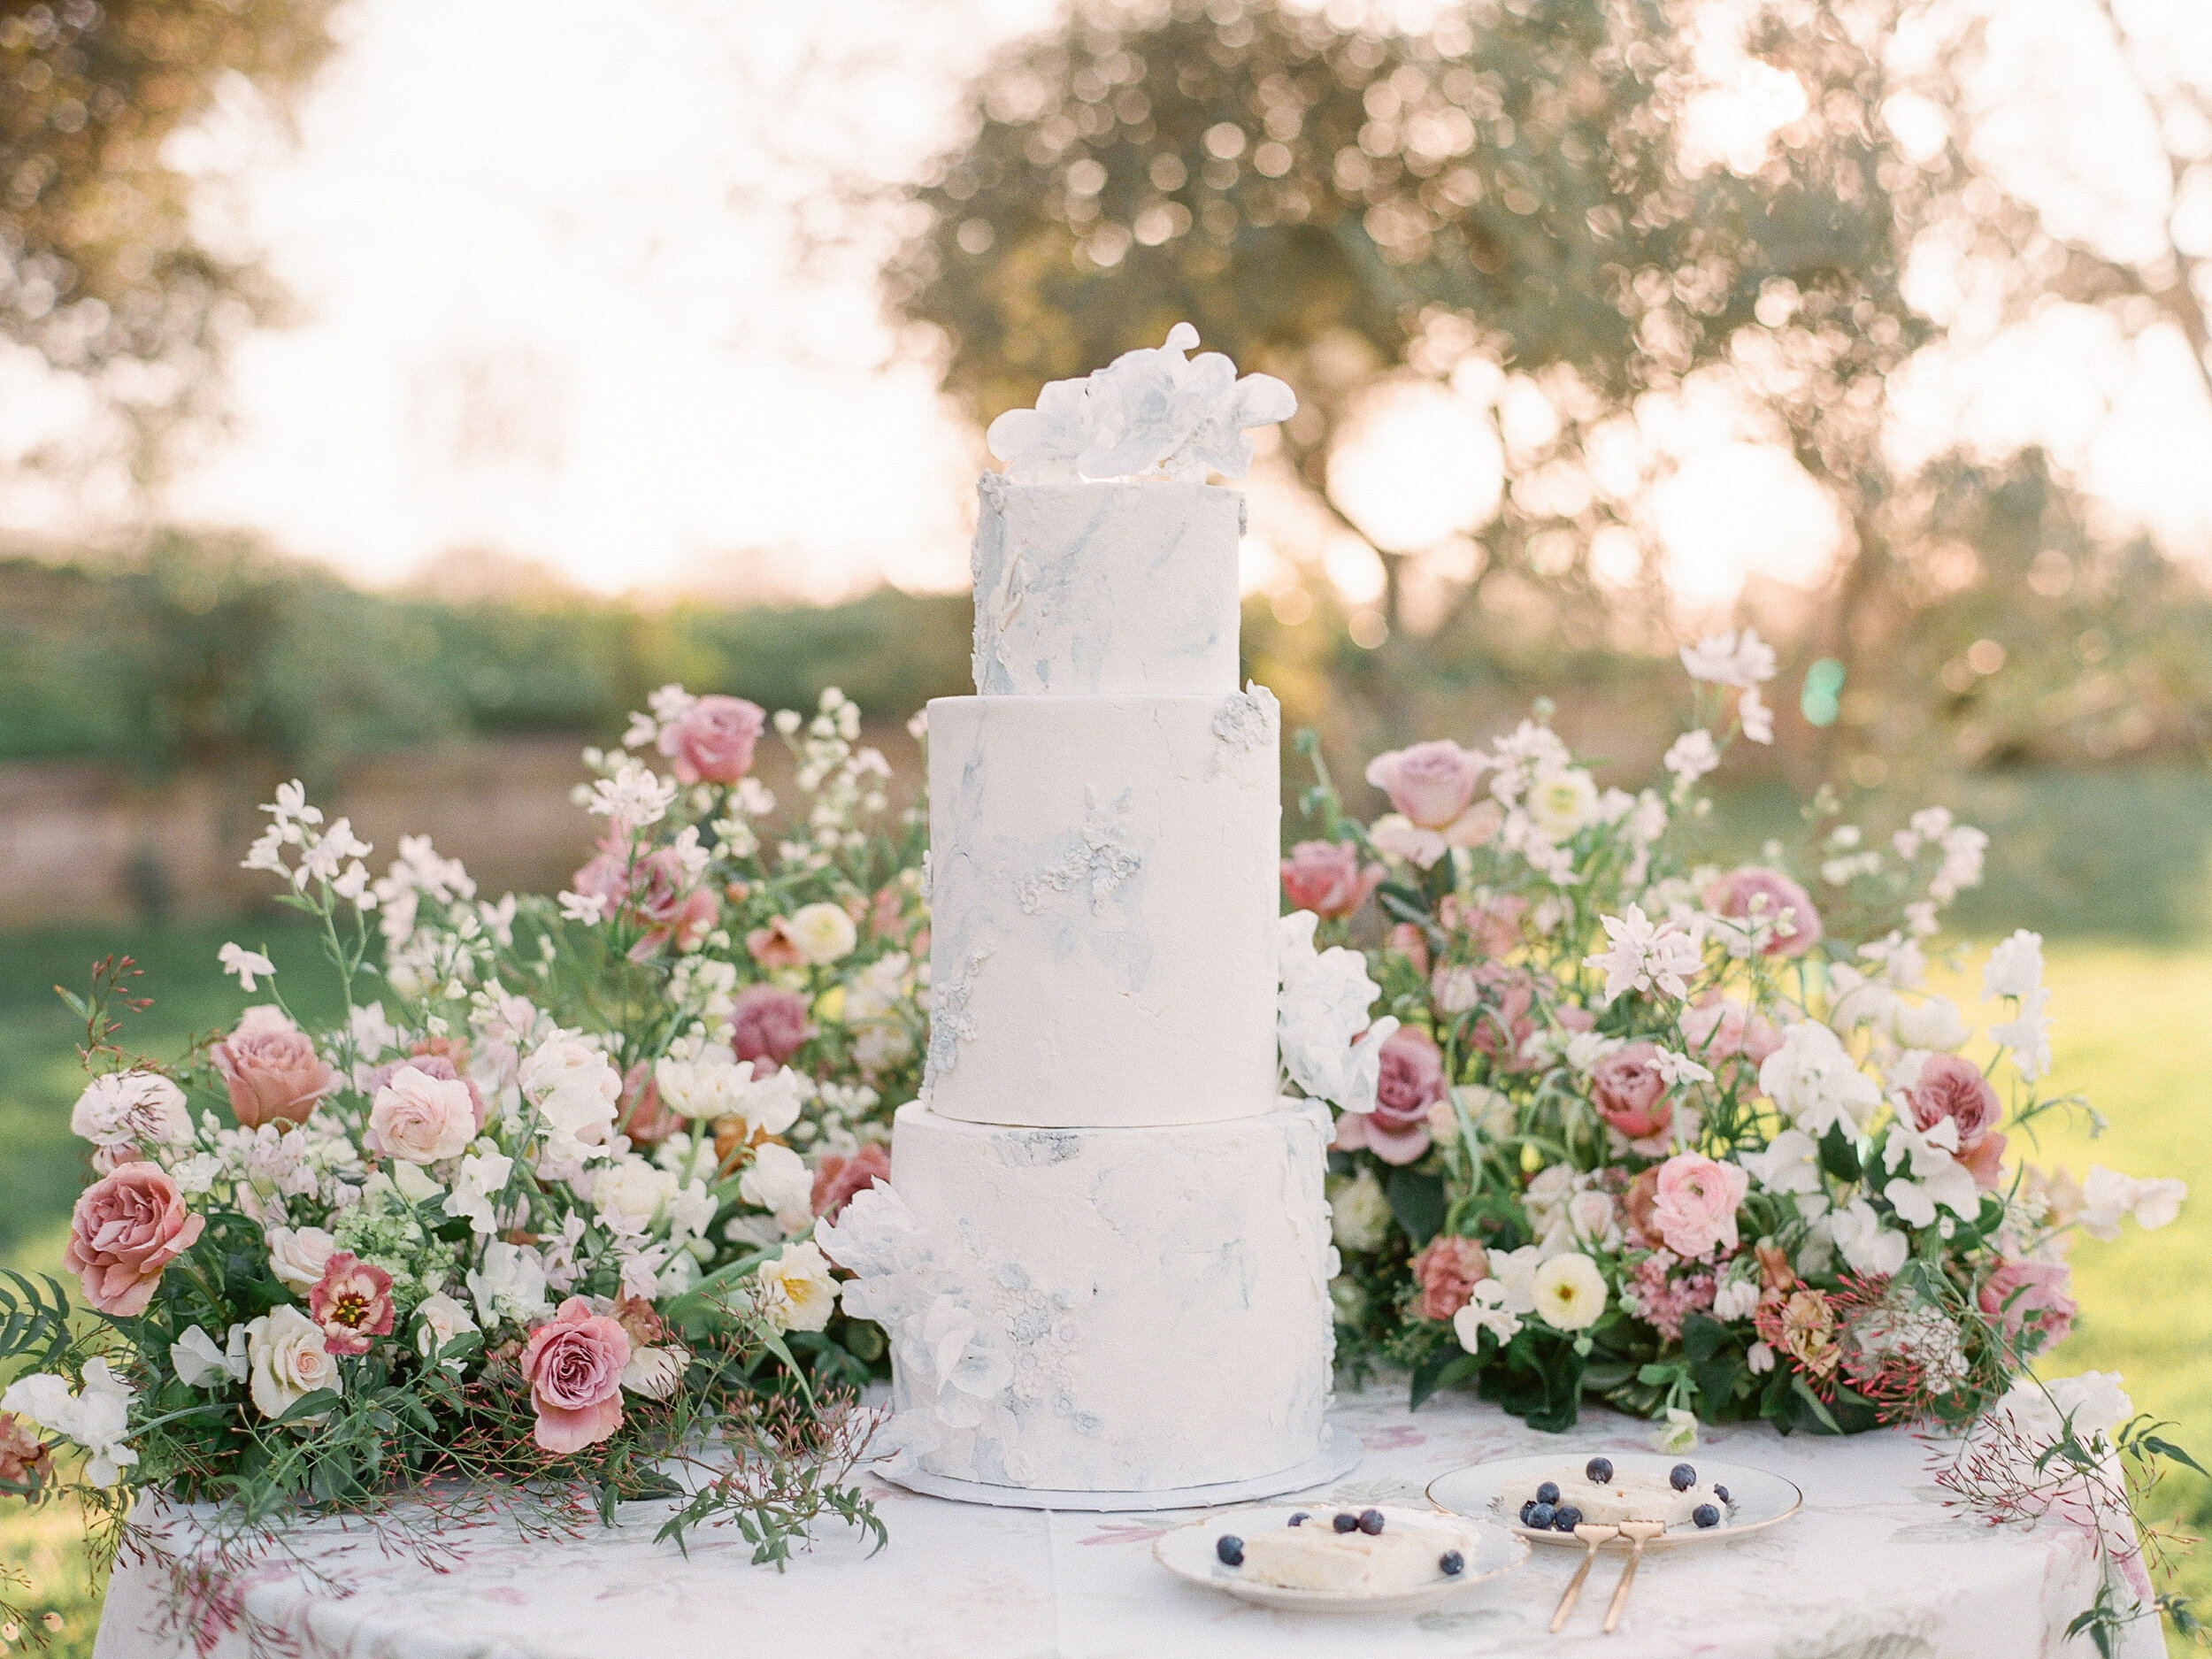 Cake with Romantic Flowers